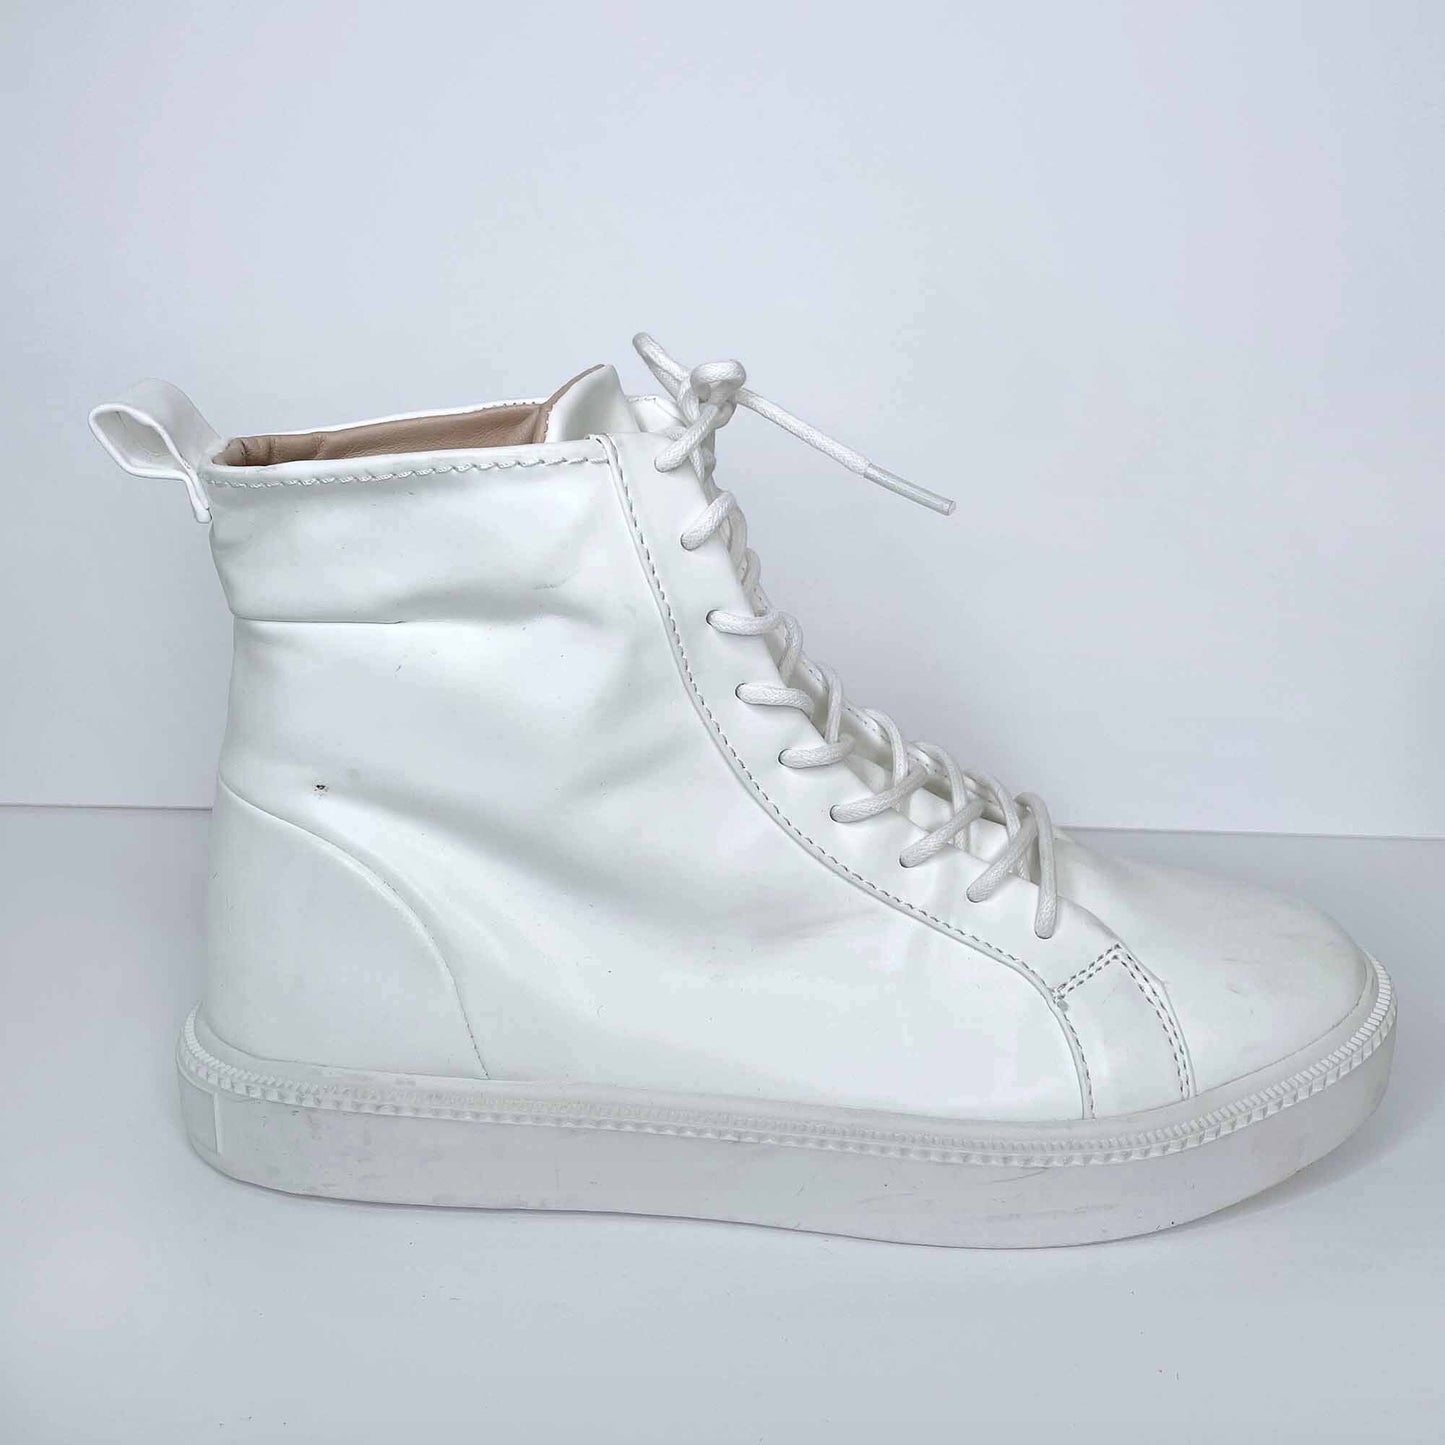 zara white leather high top sneakers - size 41